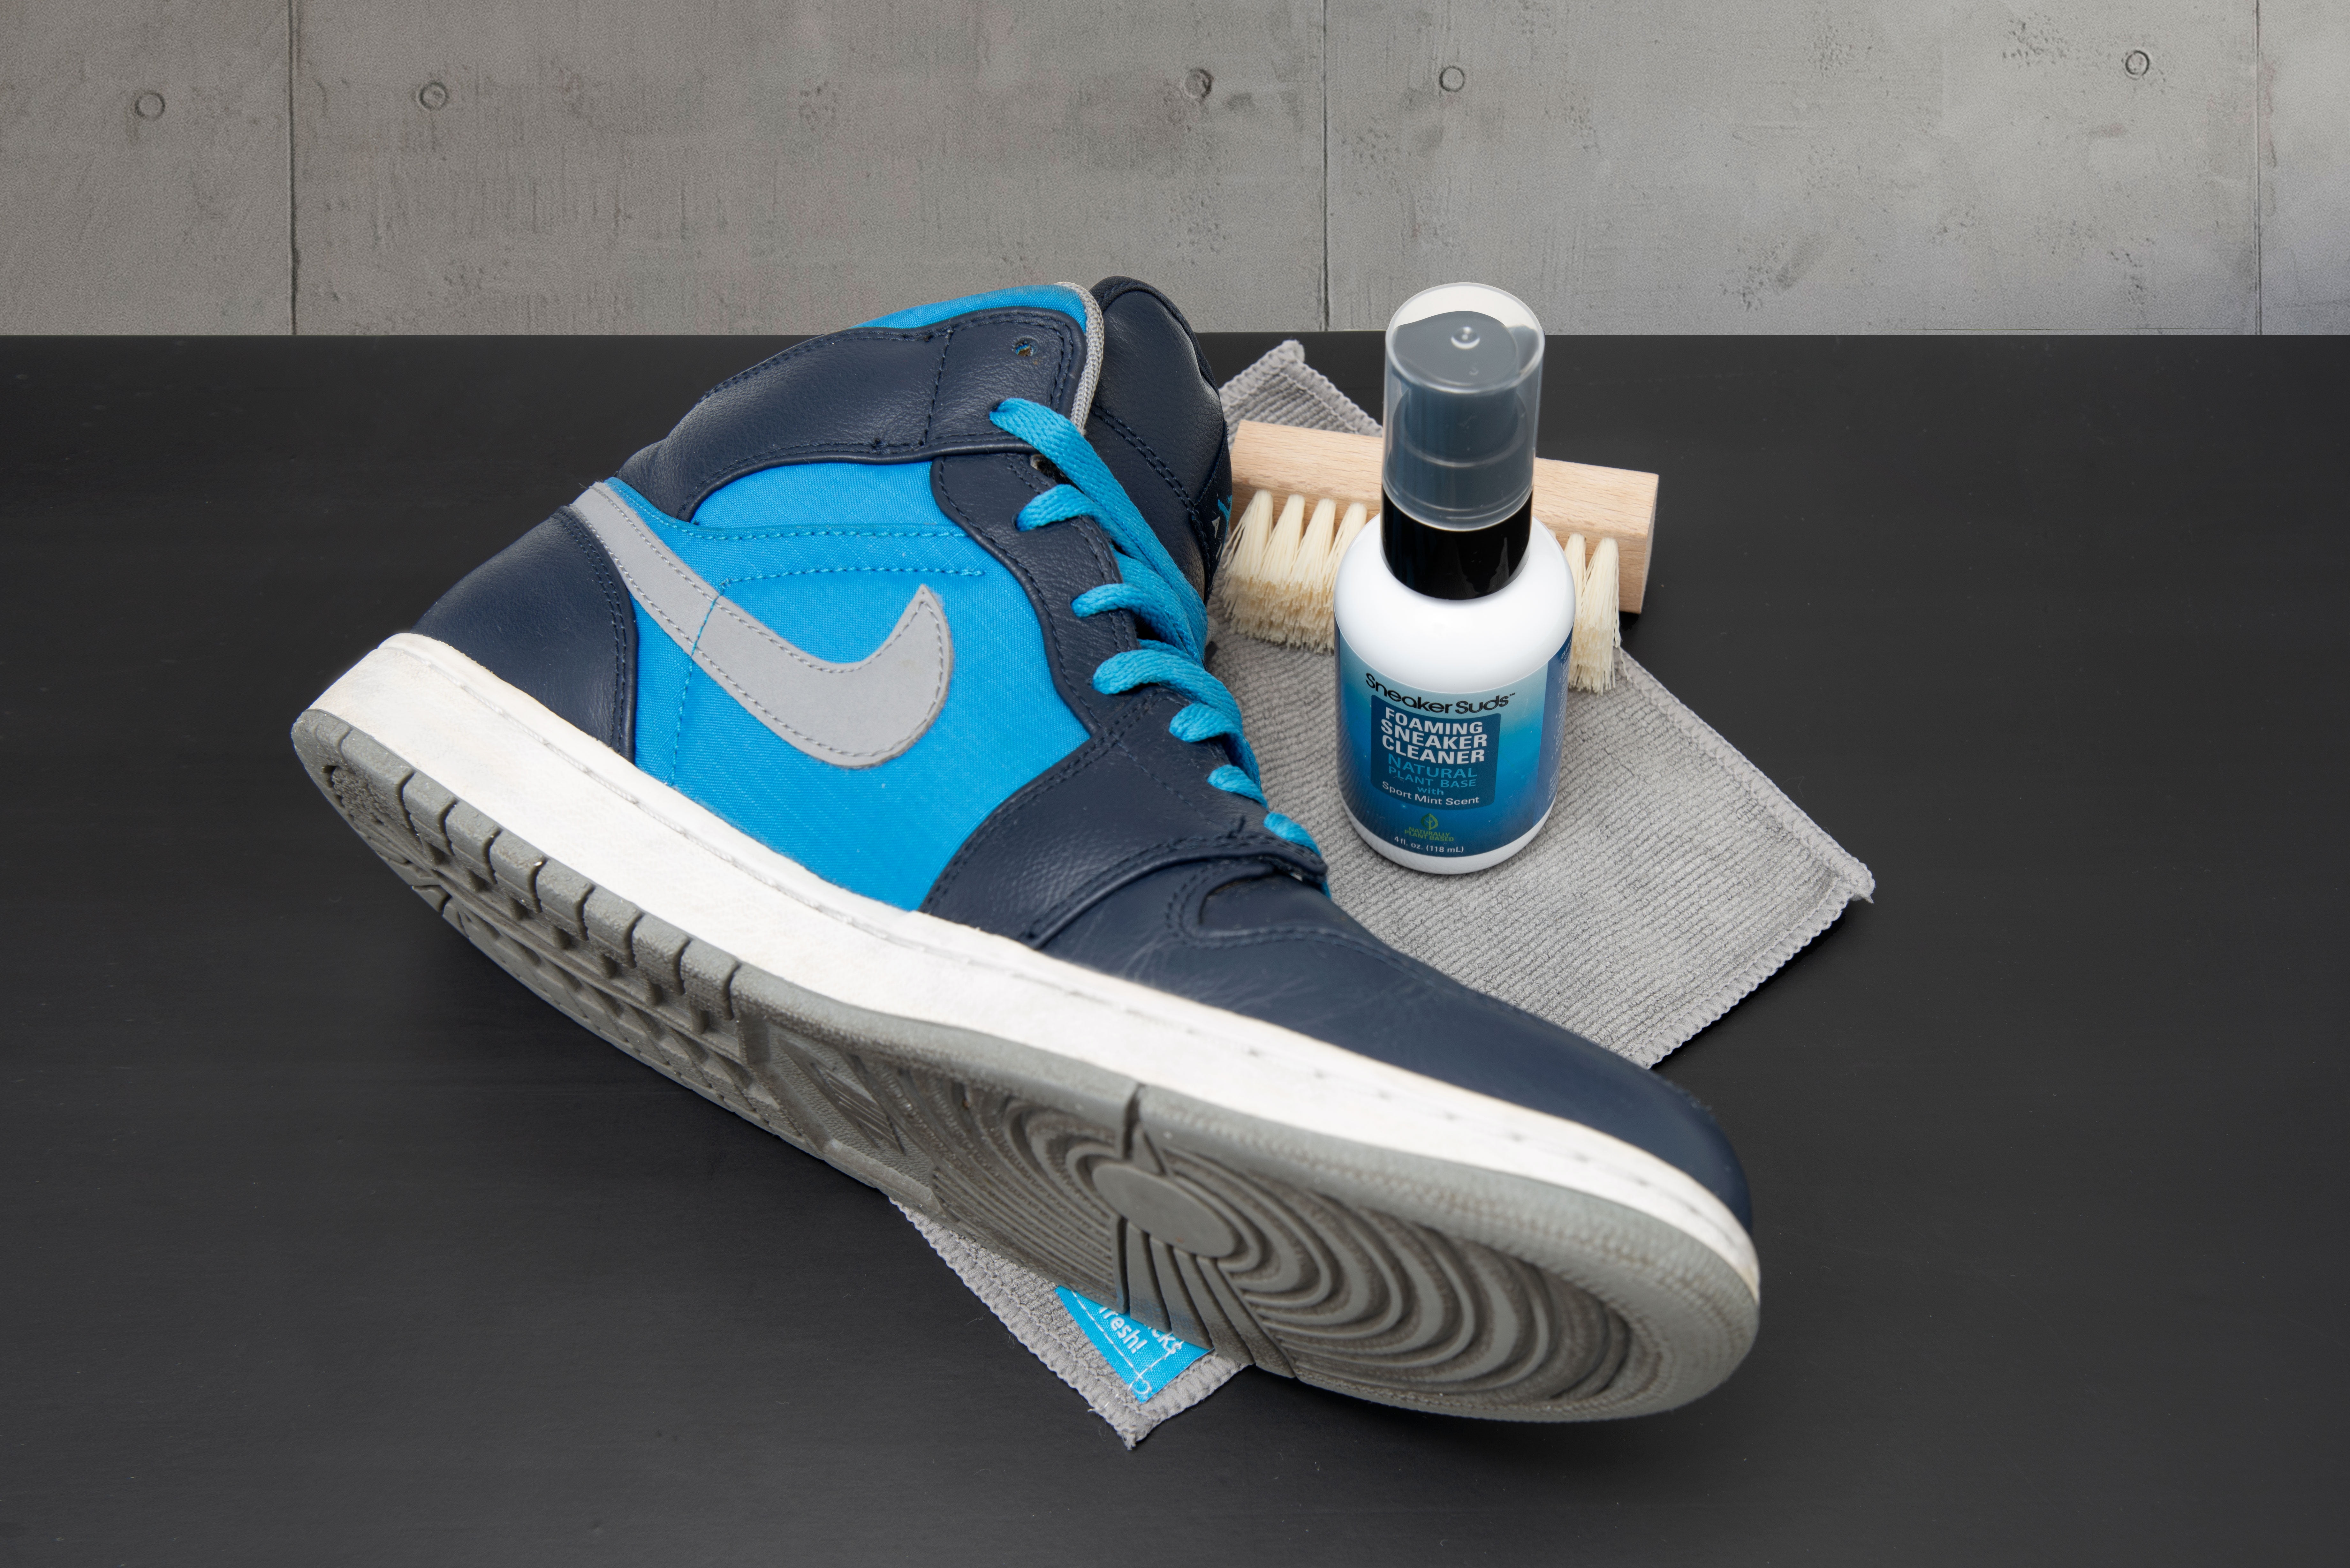 Where to Buy the Best Shoe Cleaning Kits for Sneakers – Billboard